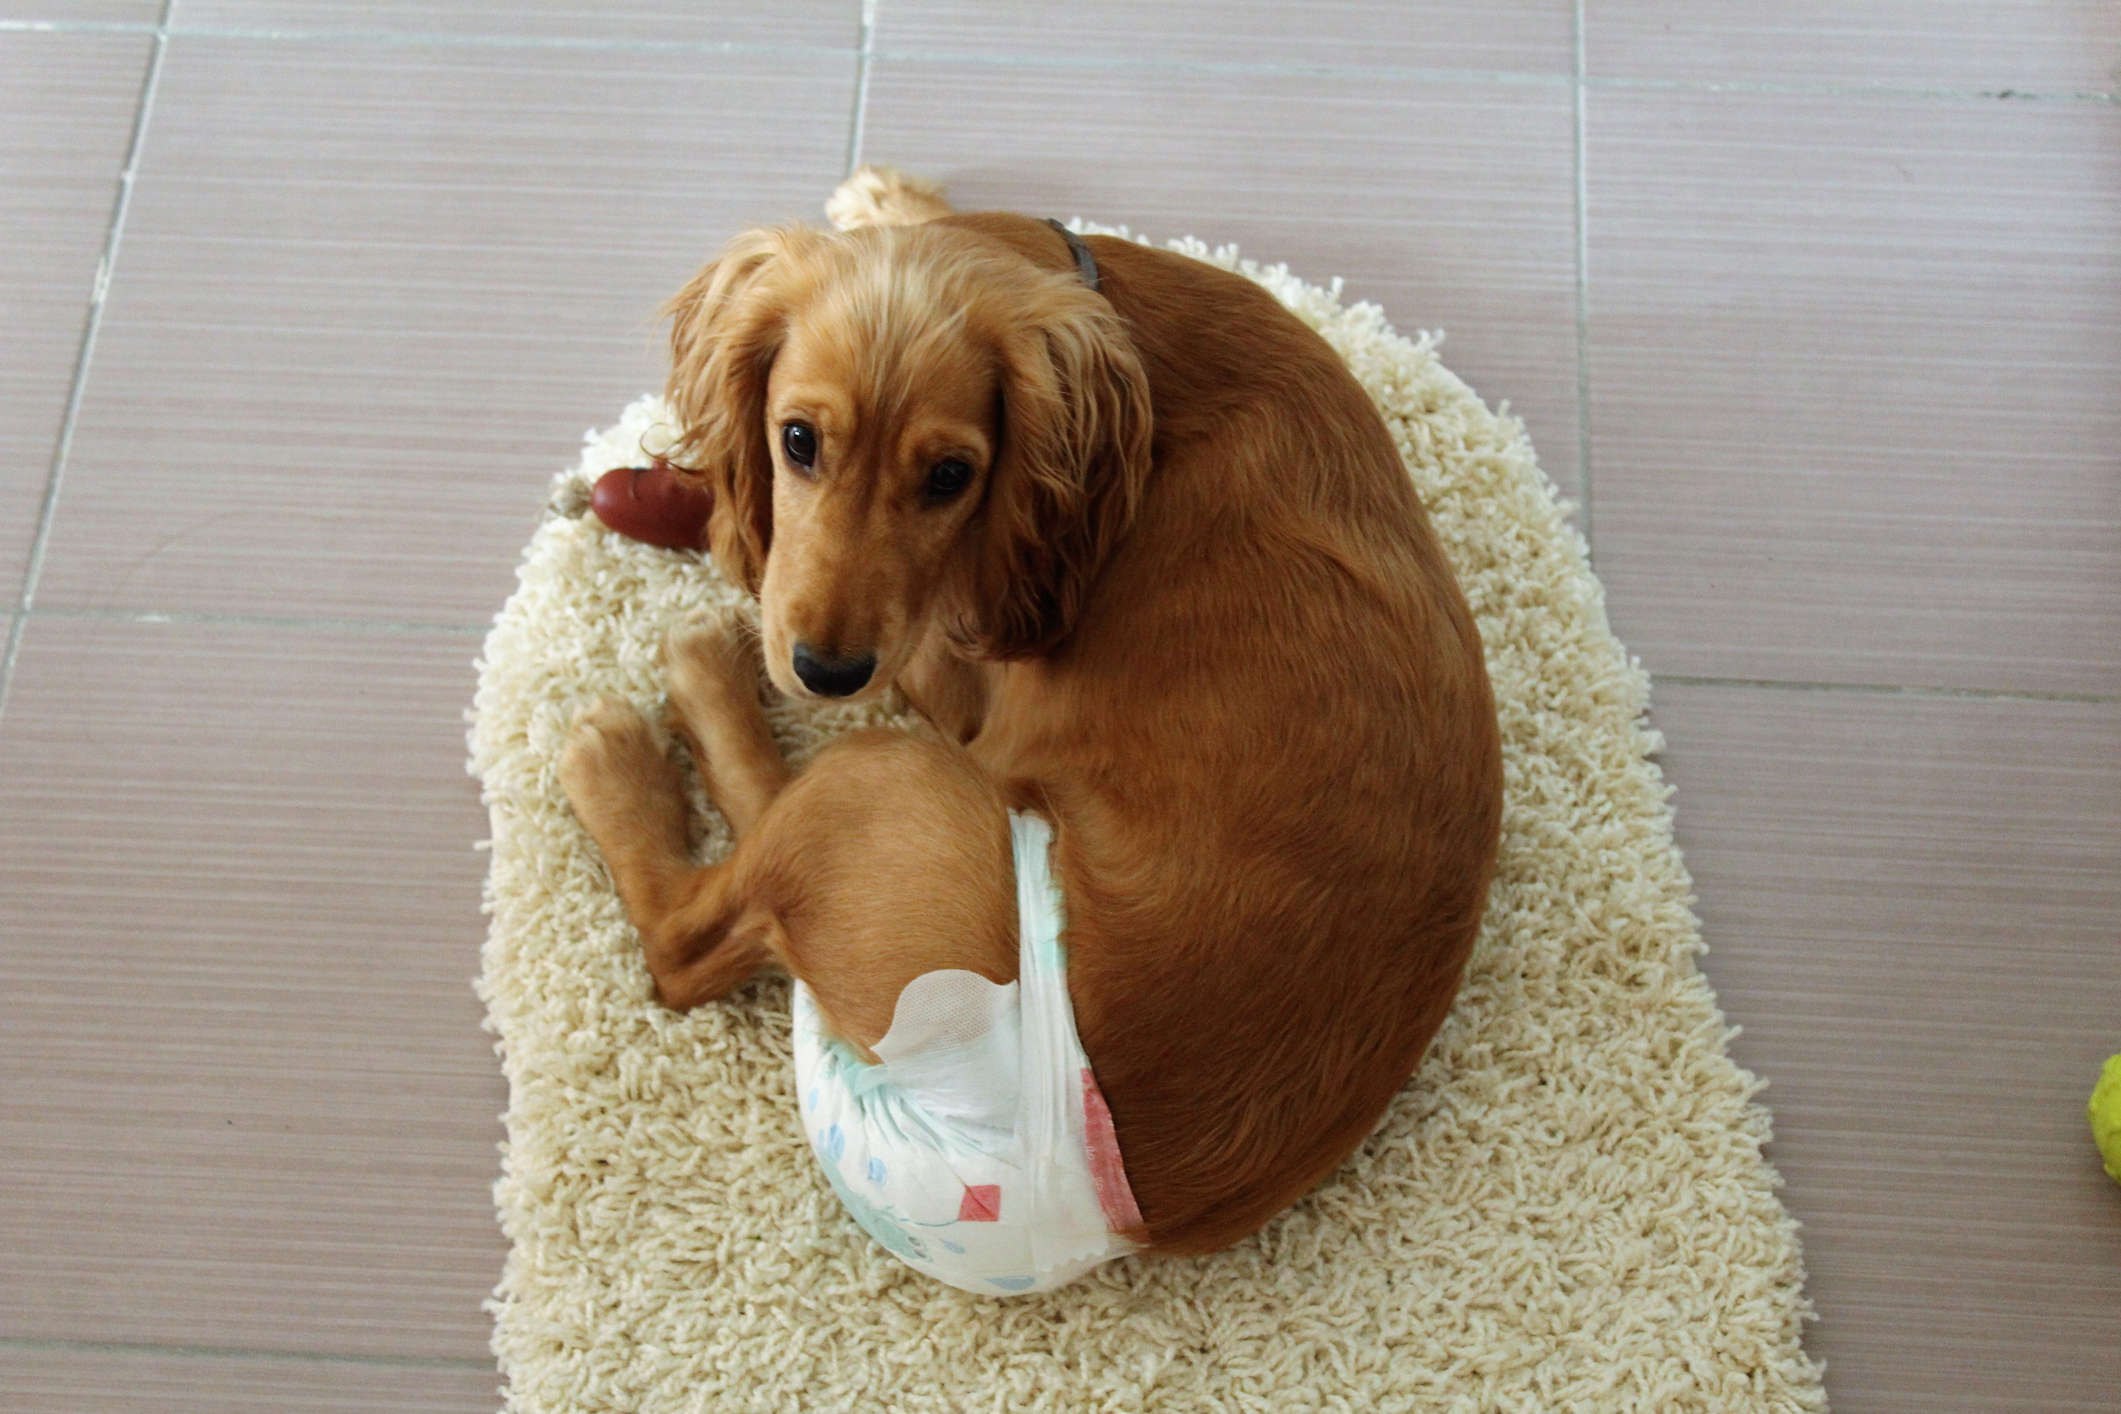 A long haired Dachshund wearing a dog diaper